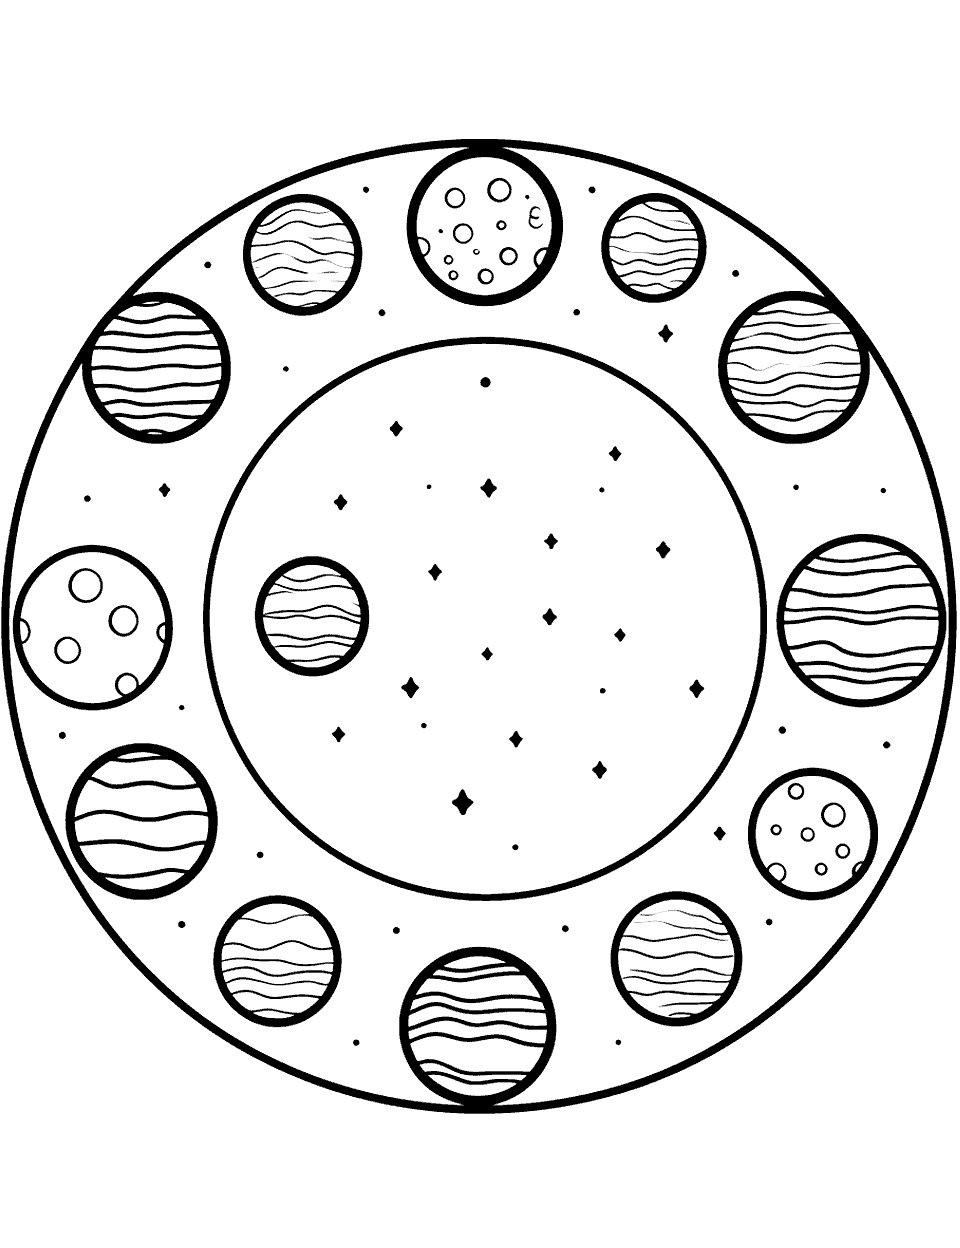 Earth's Moon Phases Solar System Coloring Page - The different phases of the moon shown in a circular layout.